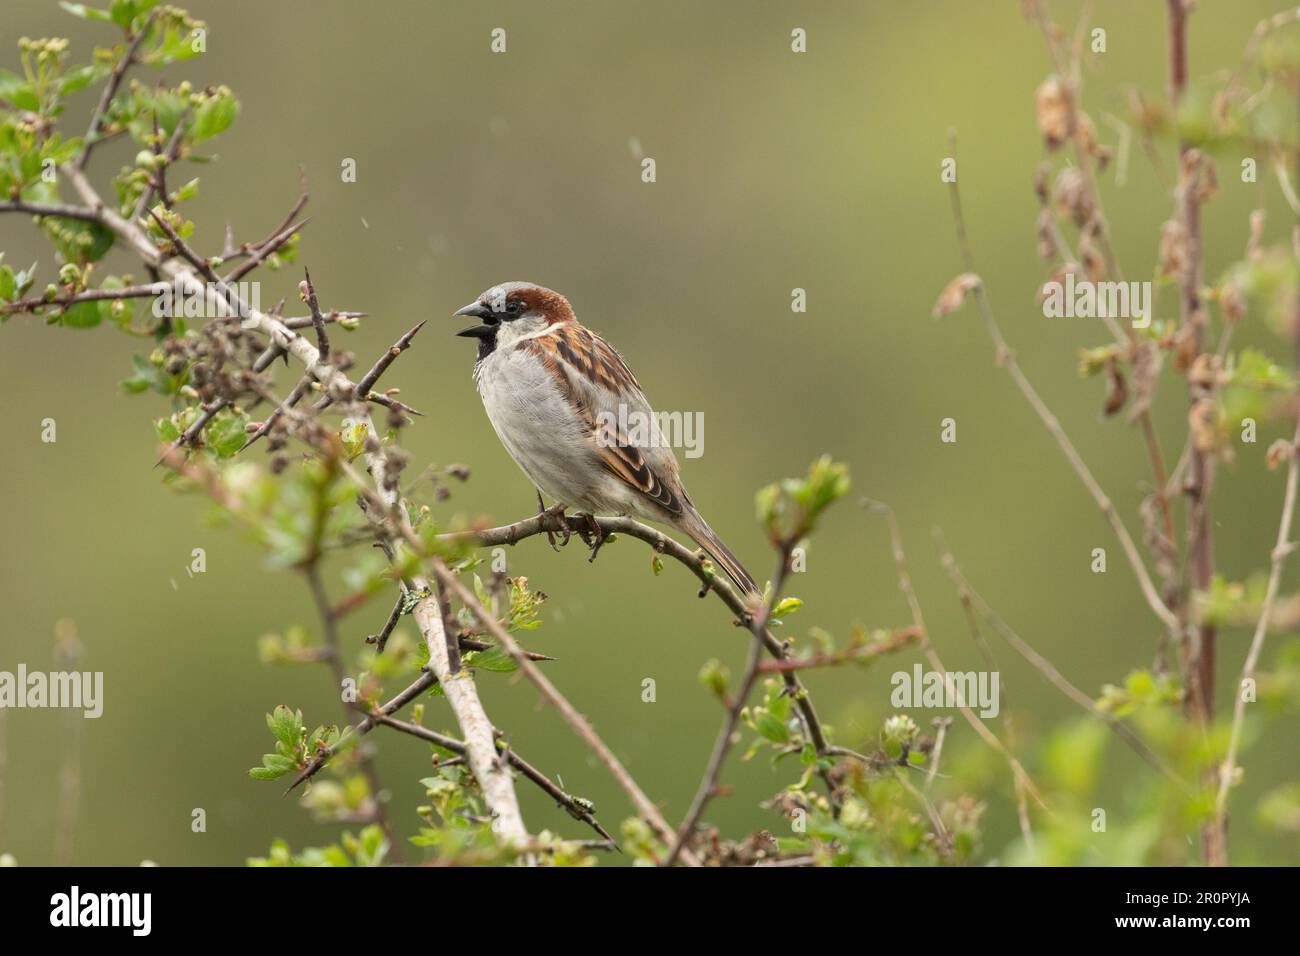 A house sparrow (Passer domesticus) sings, perched on a hawthorn tree. Stock Photo